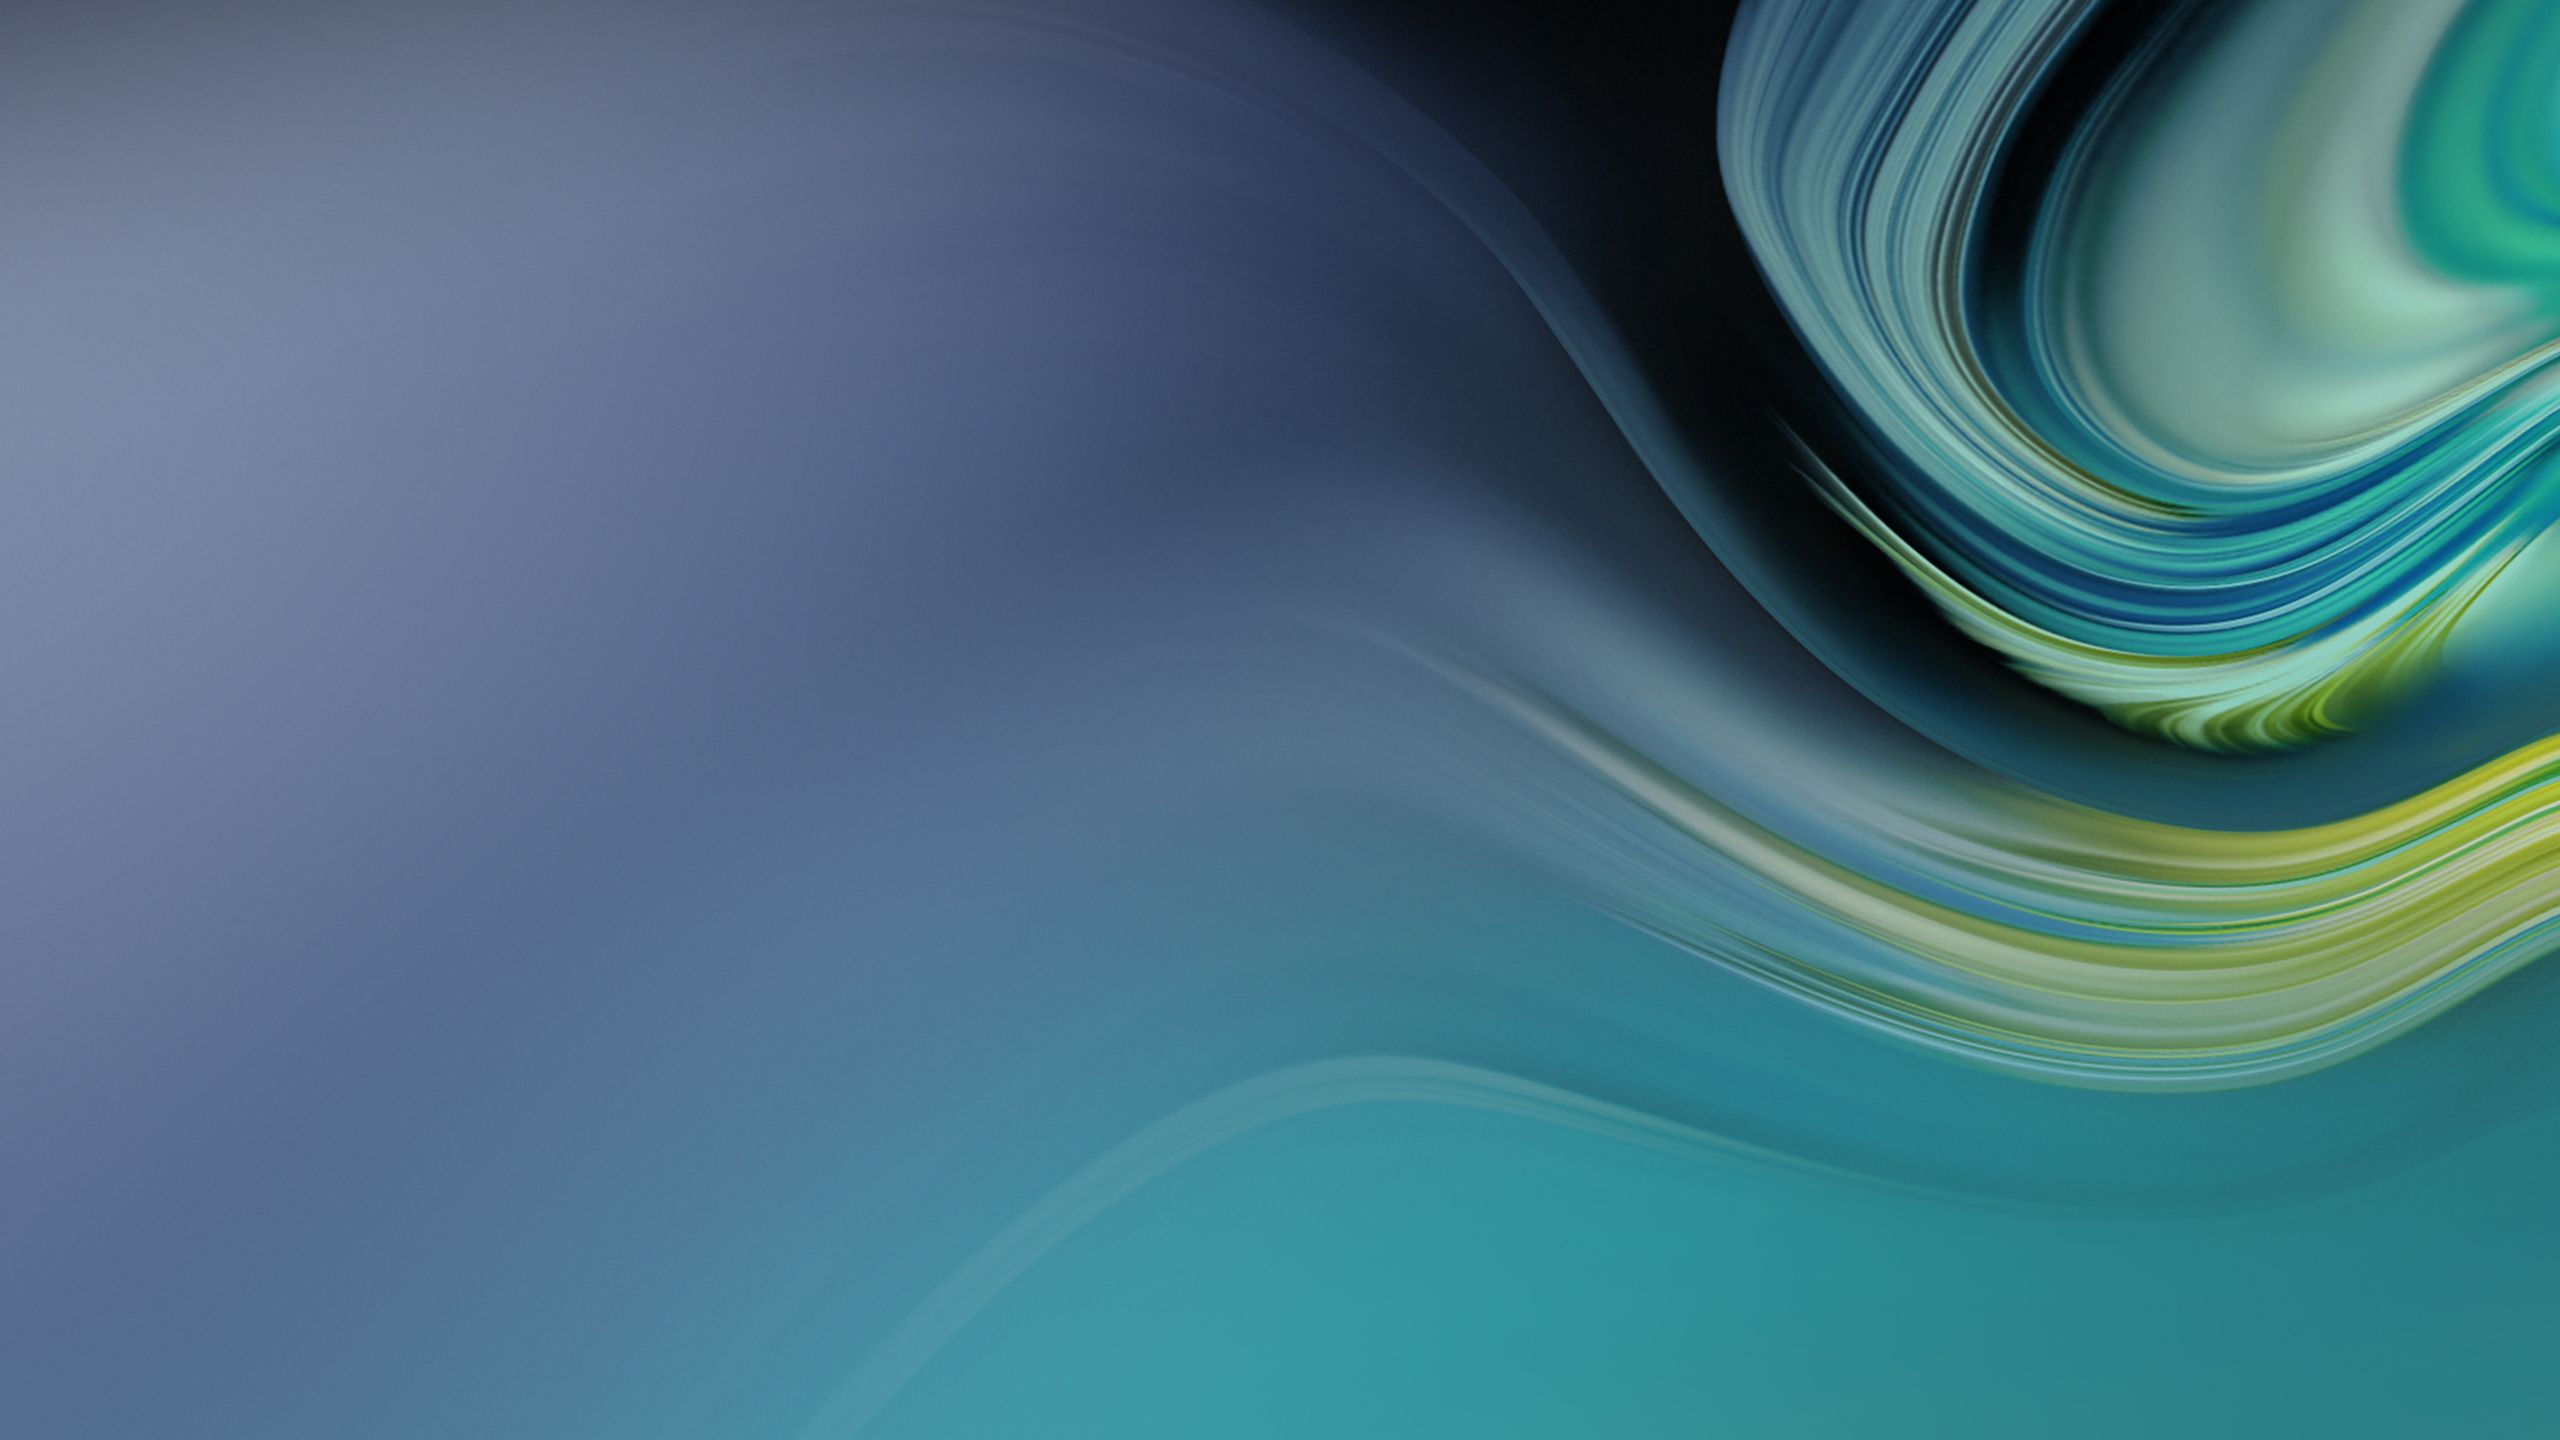 2560x1440 Teal Gradient Abstract Stock | Abstract, Teal abstract wallpaper, Teal and black wallpaper